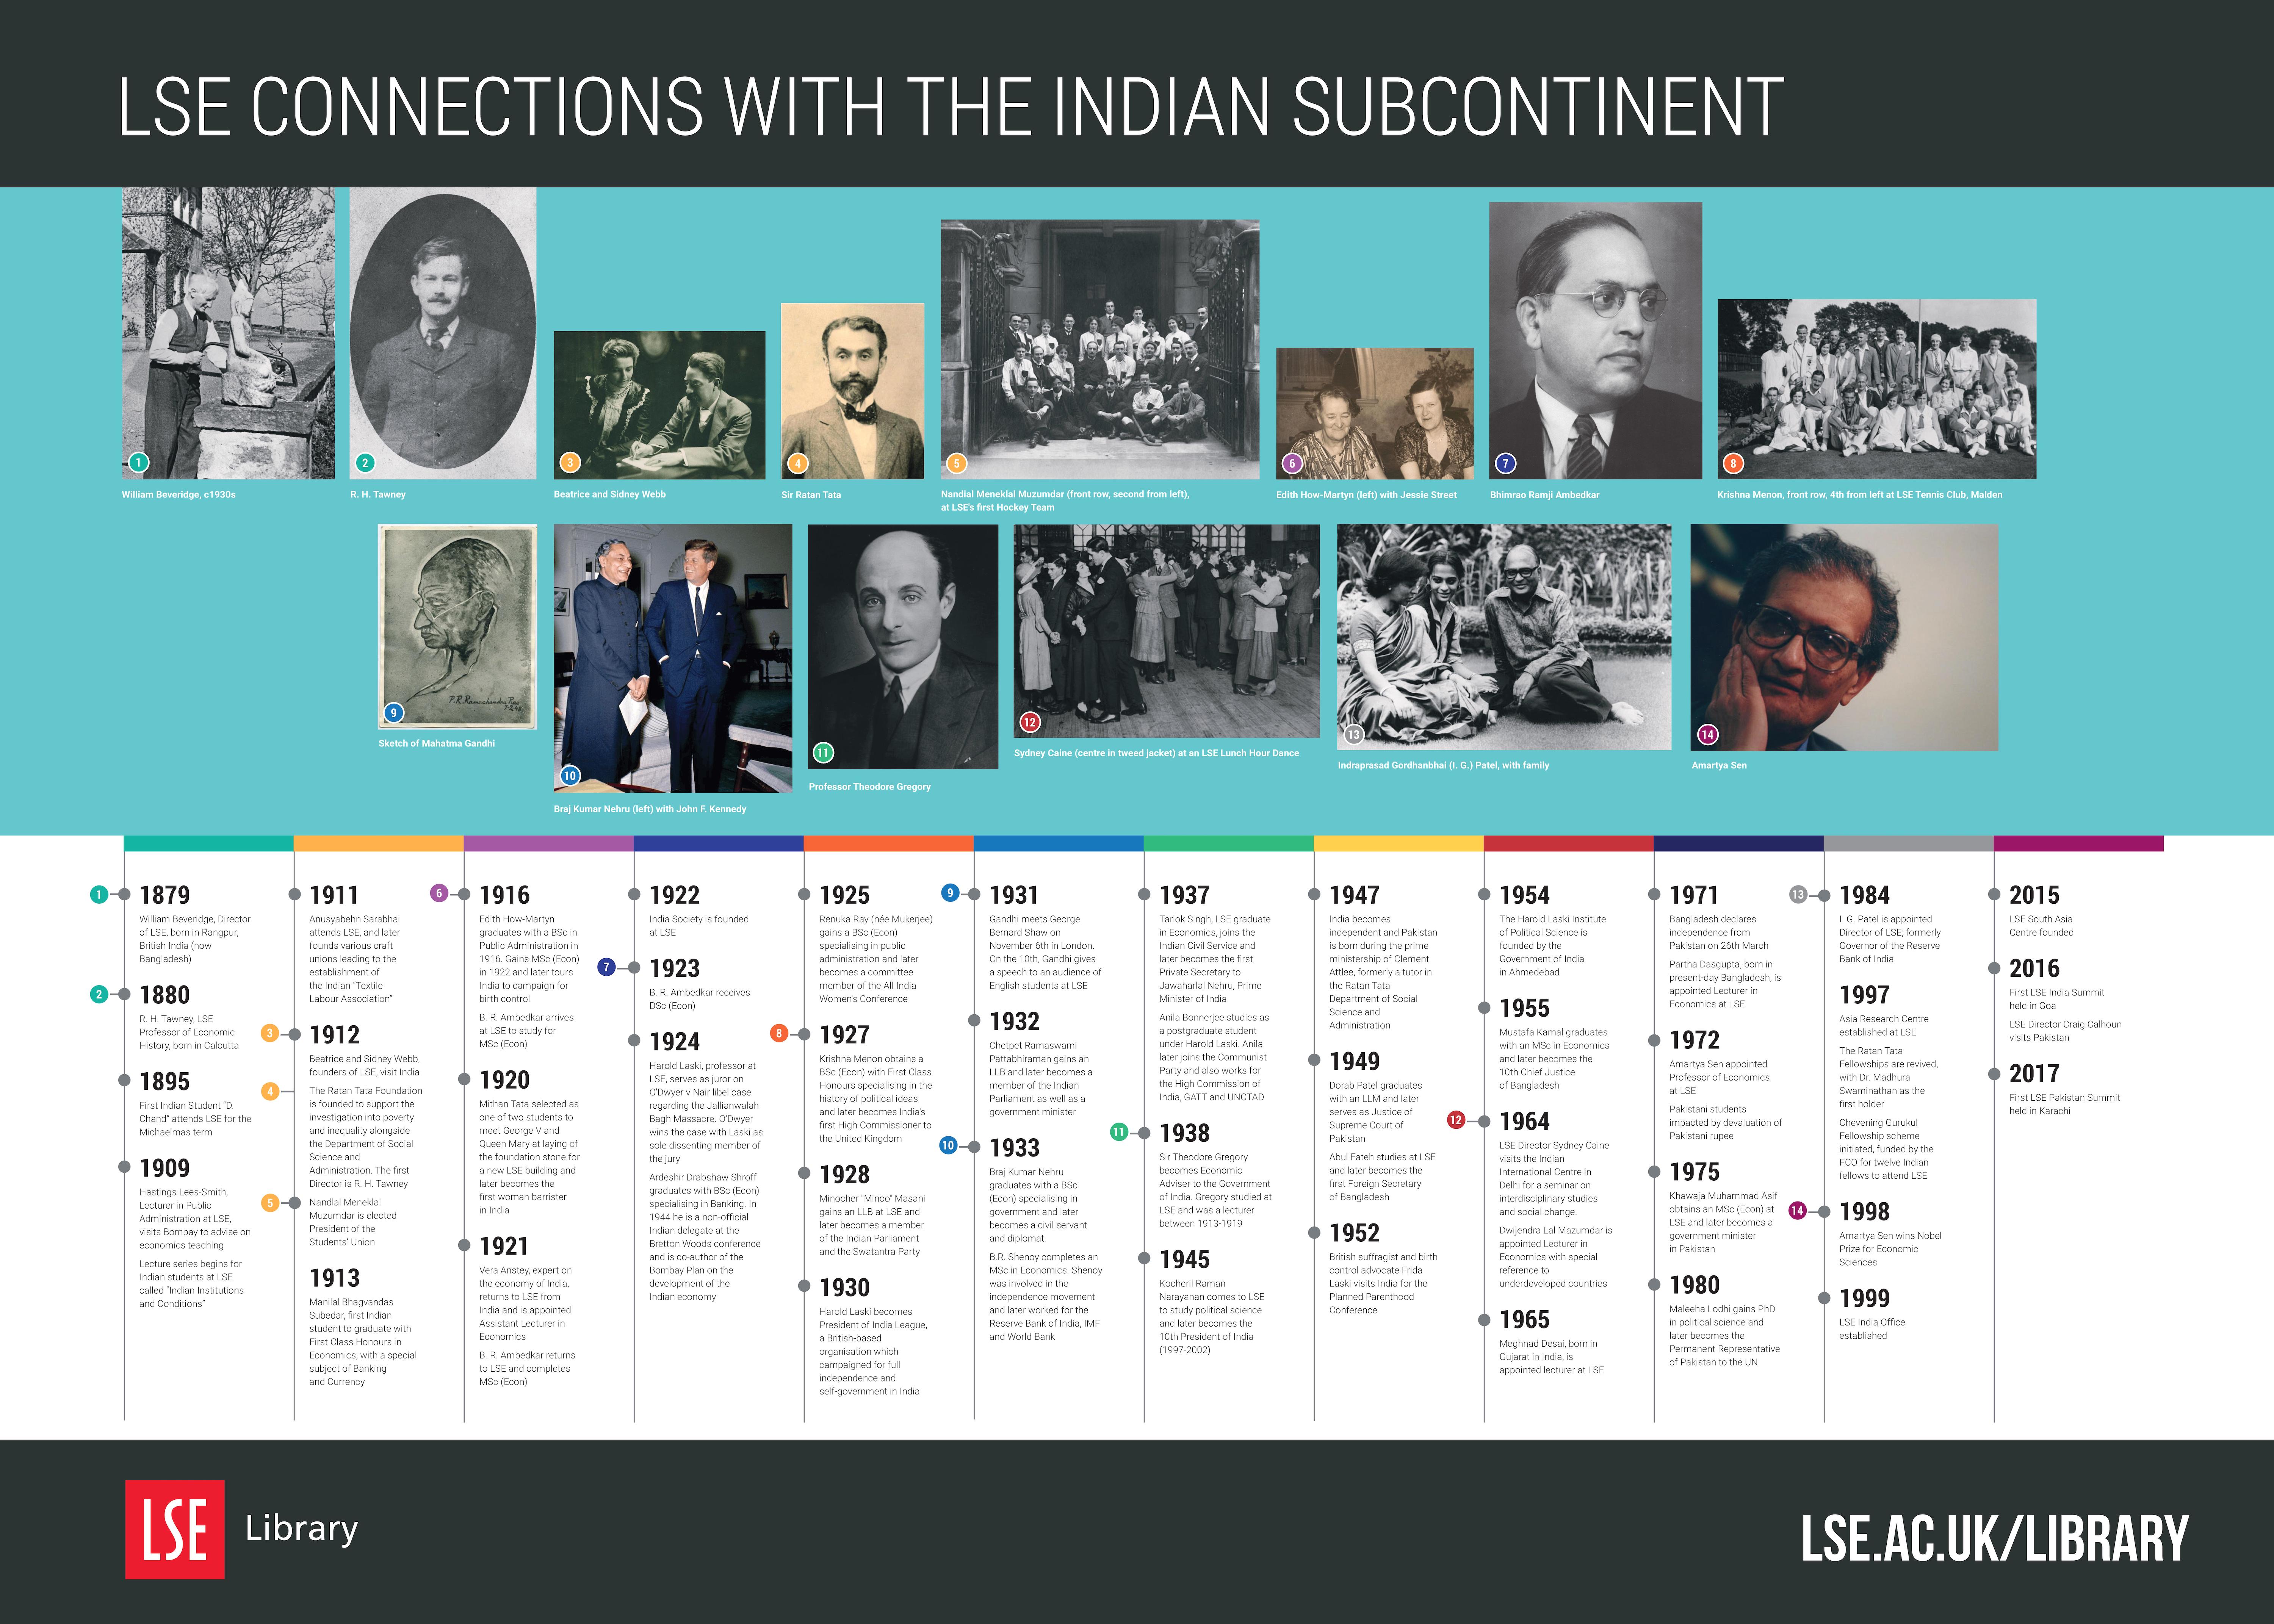 A infographic timeline highlighting LSE connections with the Indian Subcontinent